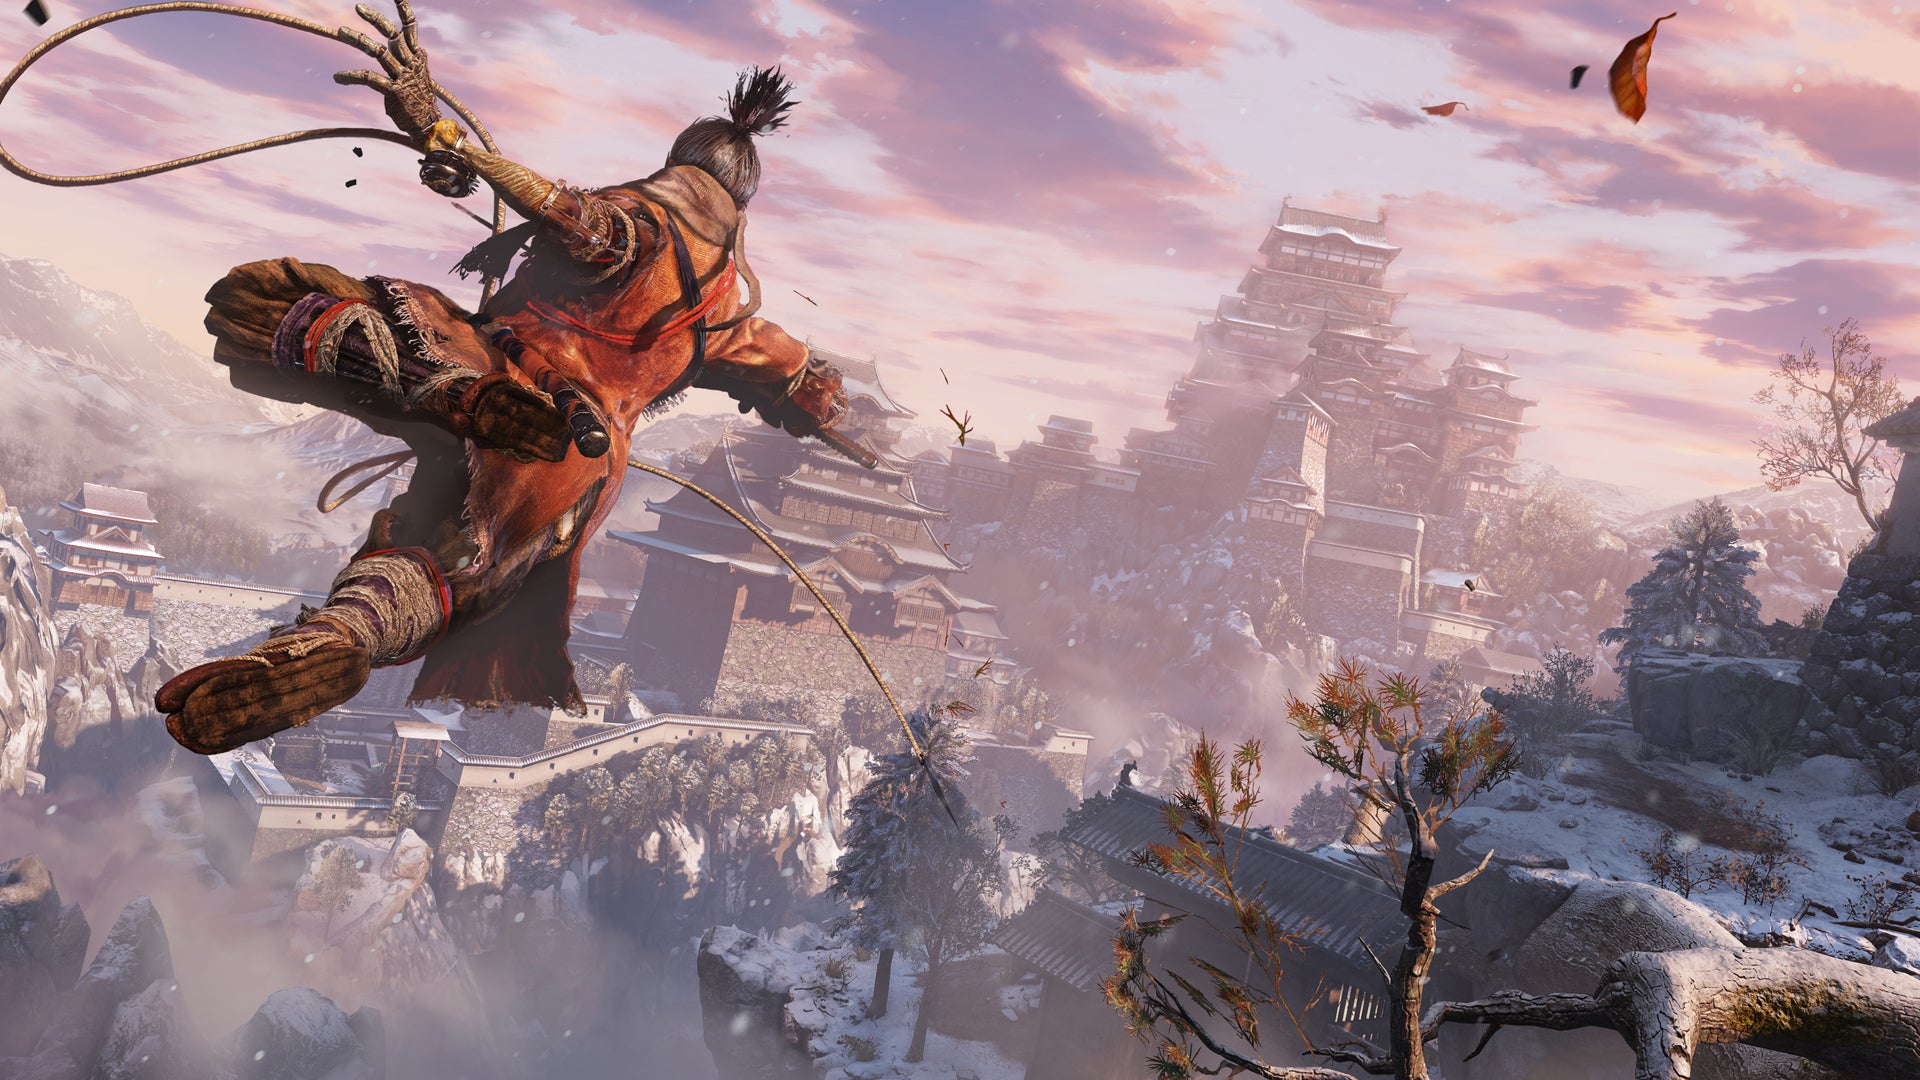 Image for Snag Sekiro: Shadows Die Twice on PS4 for under $50 at Amazon